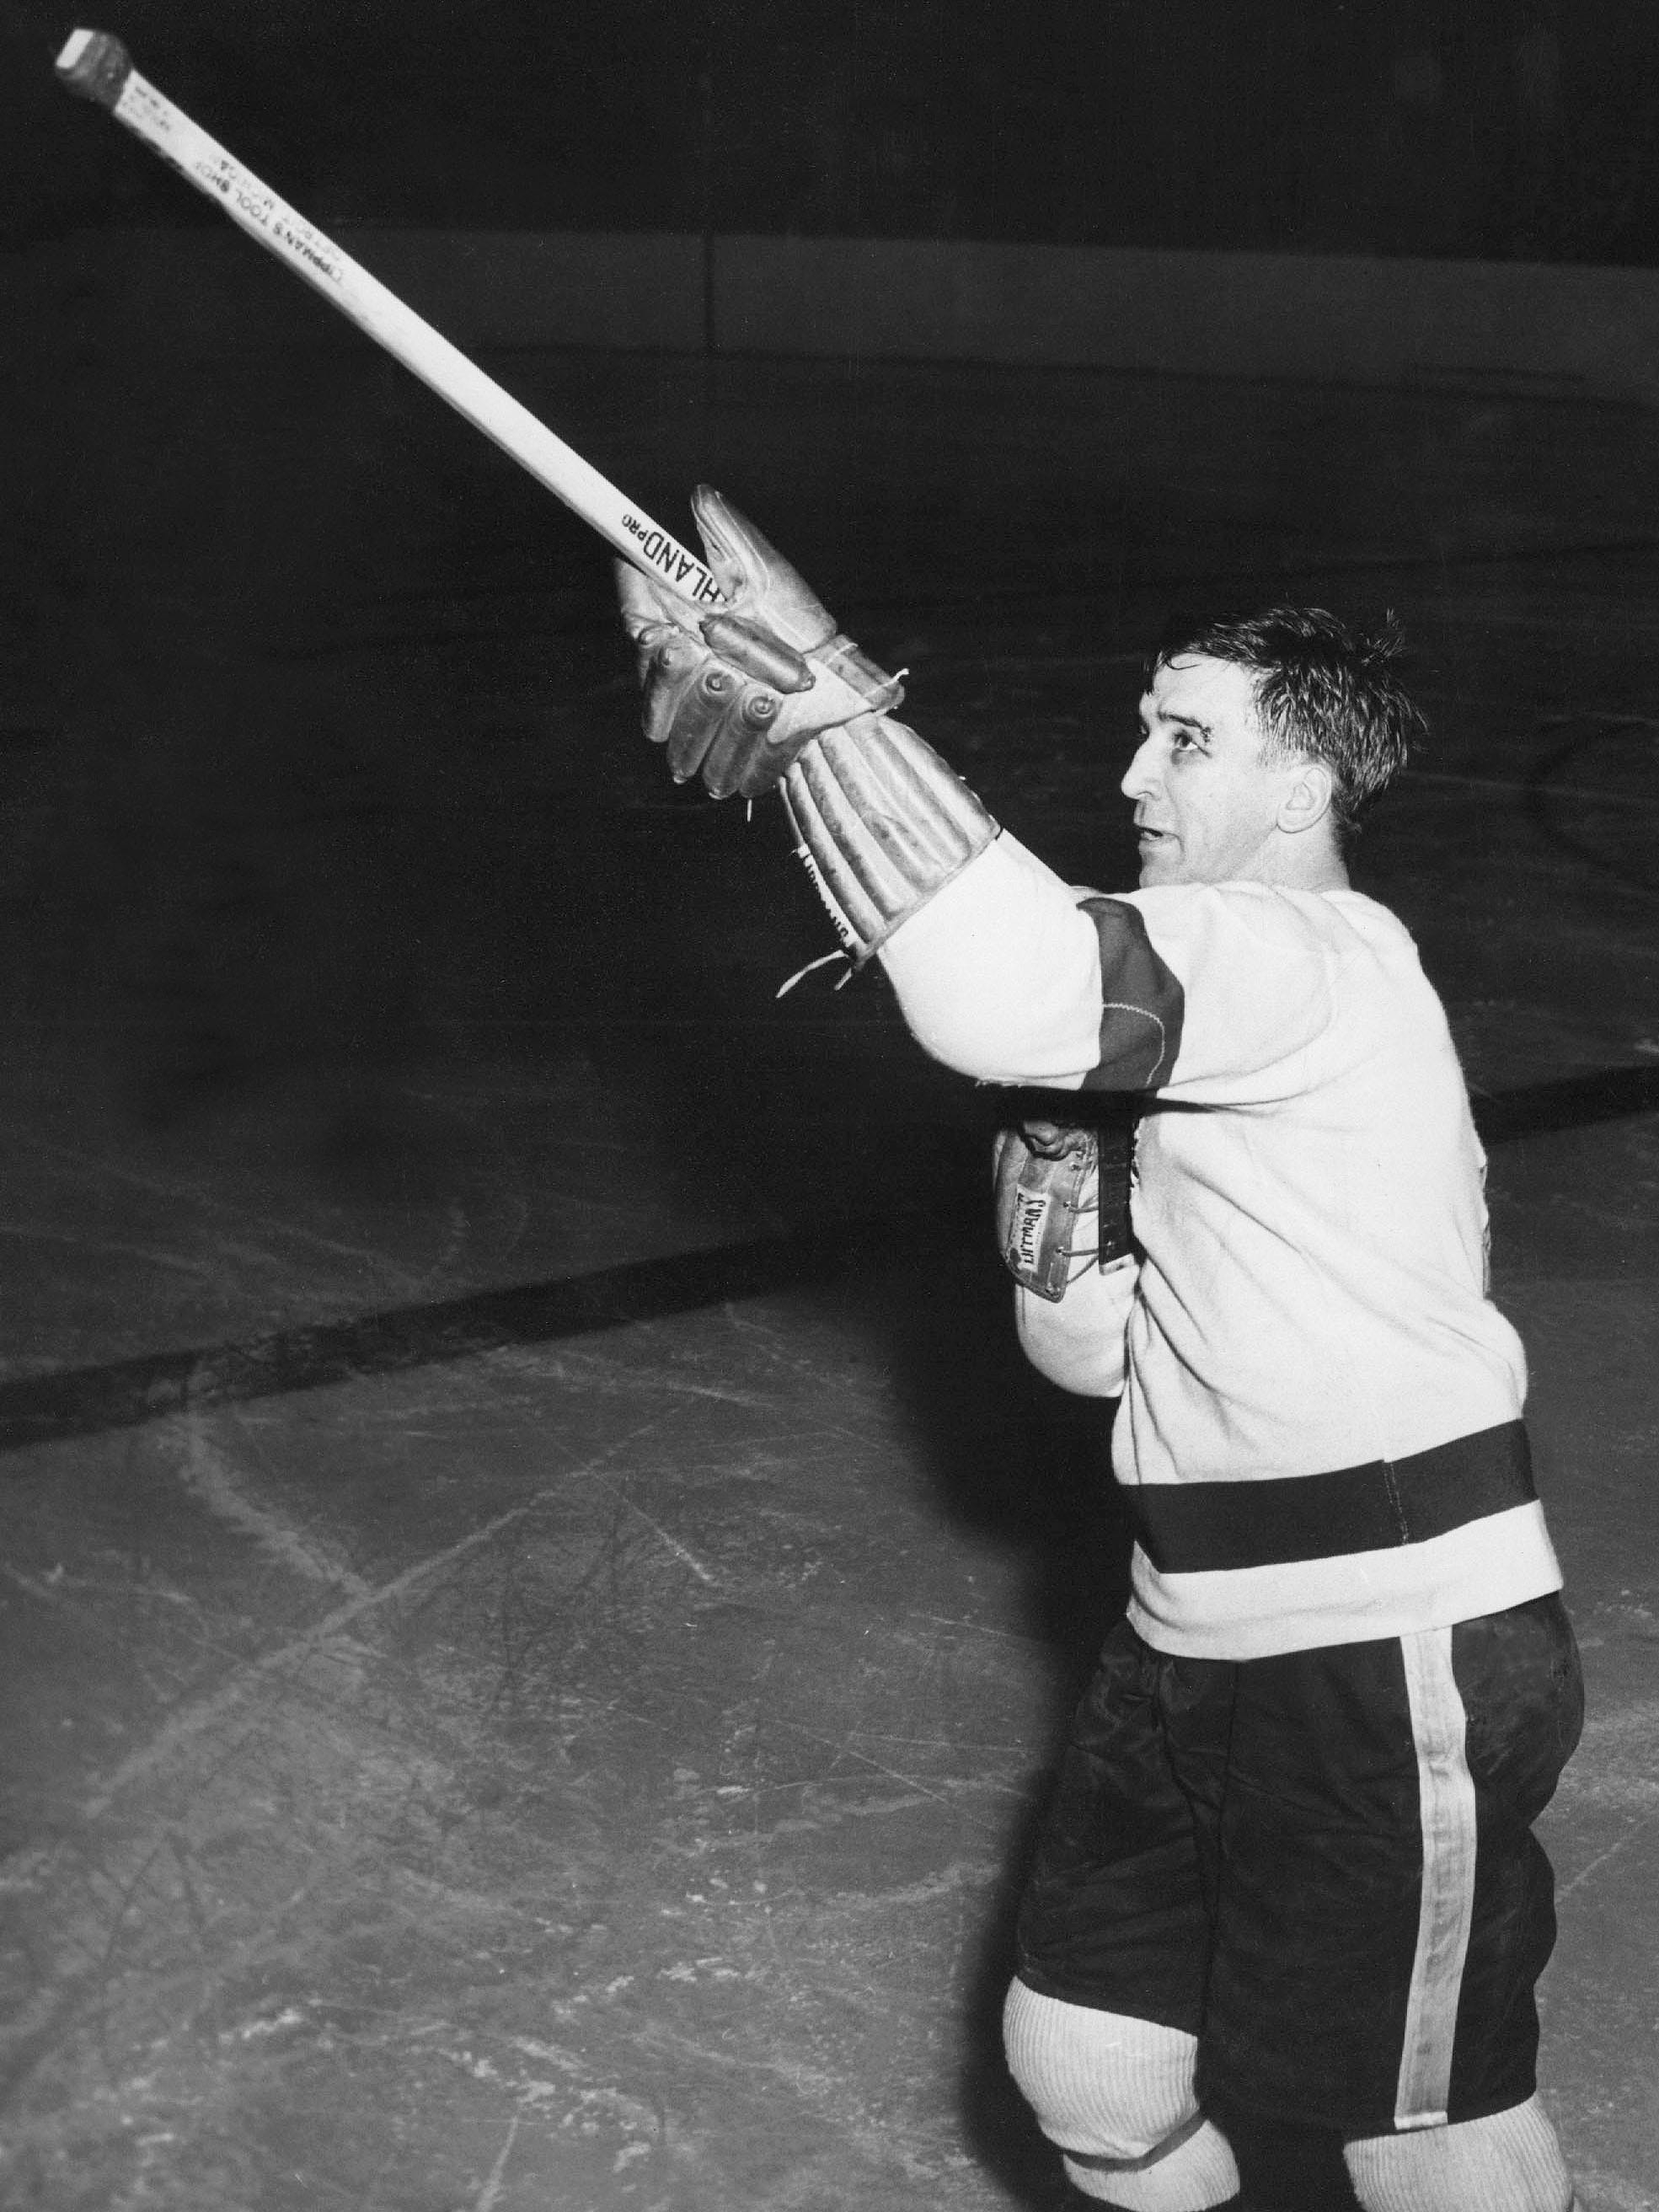 Ted Lindsay uses his stick to shoot the crowd after ignoring a death threat and scoring the overtime winner in Game 3 of the 1956 Stanley Cup semifinal in Toronto.